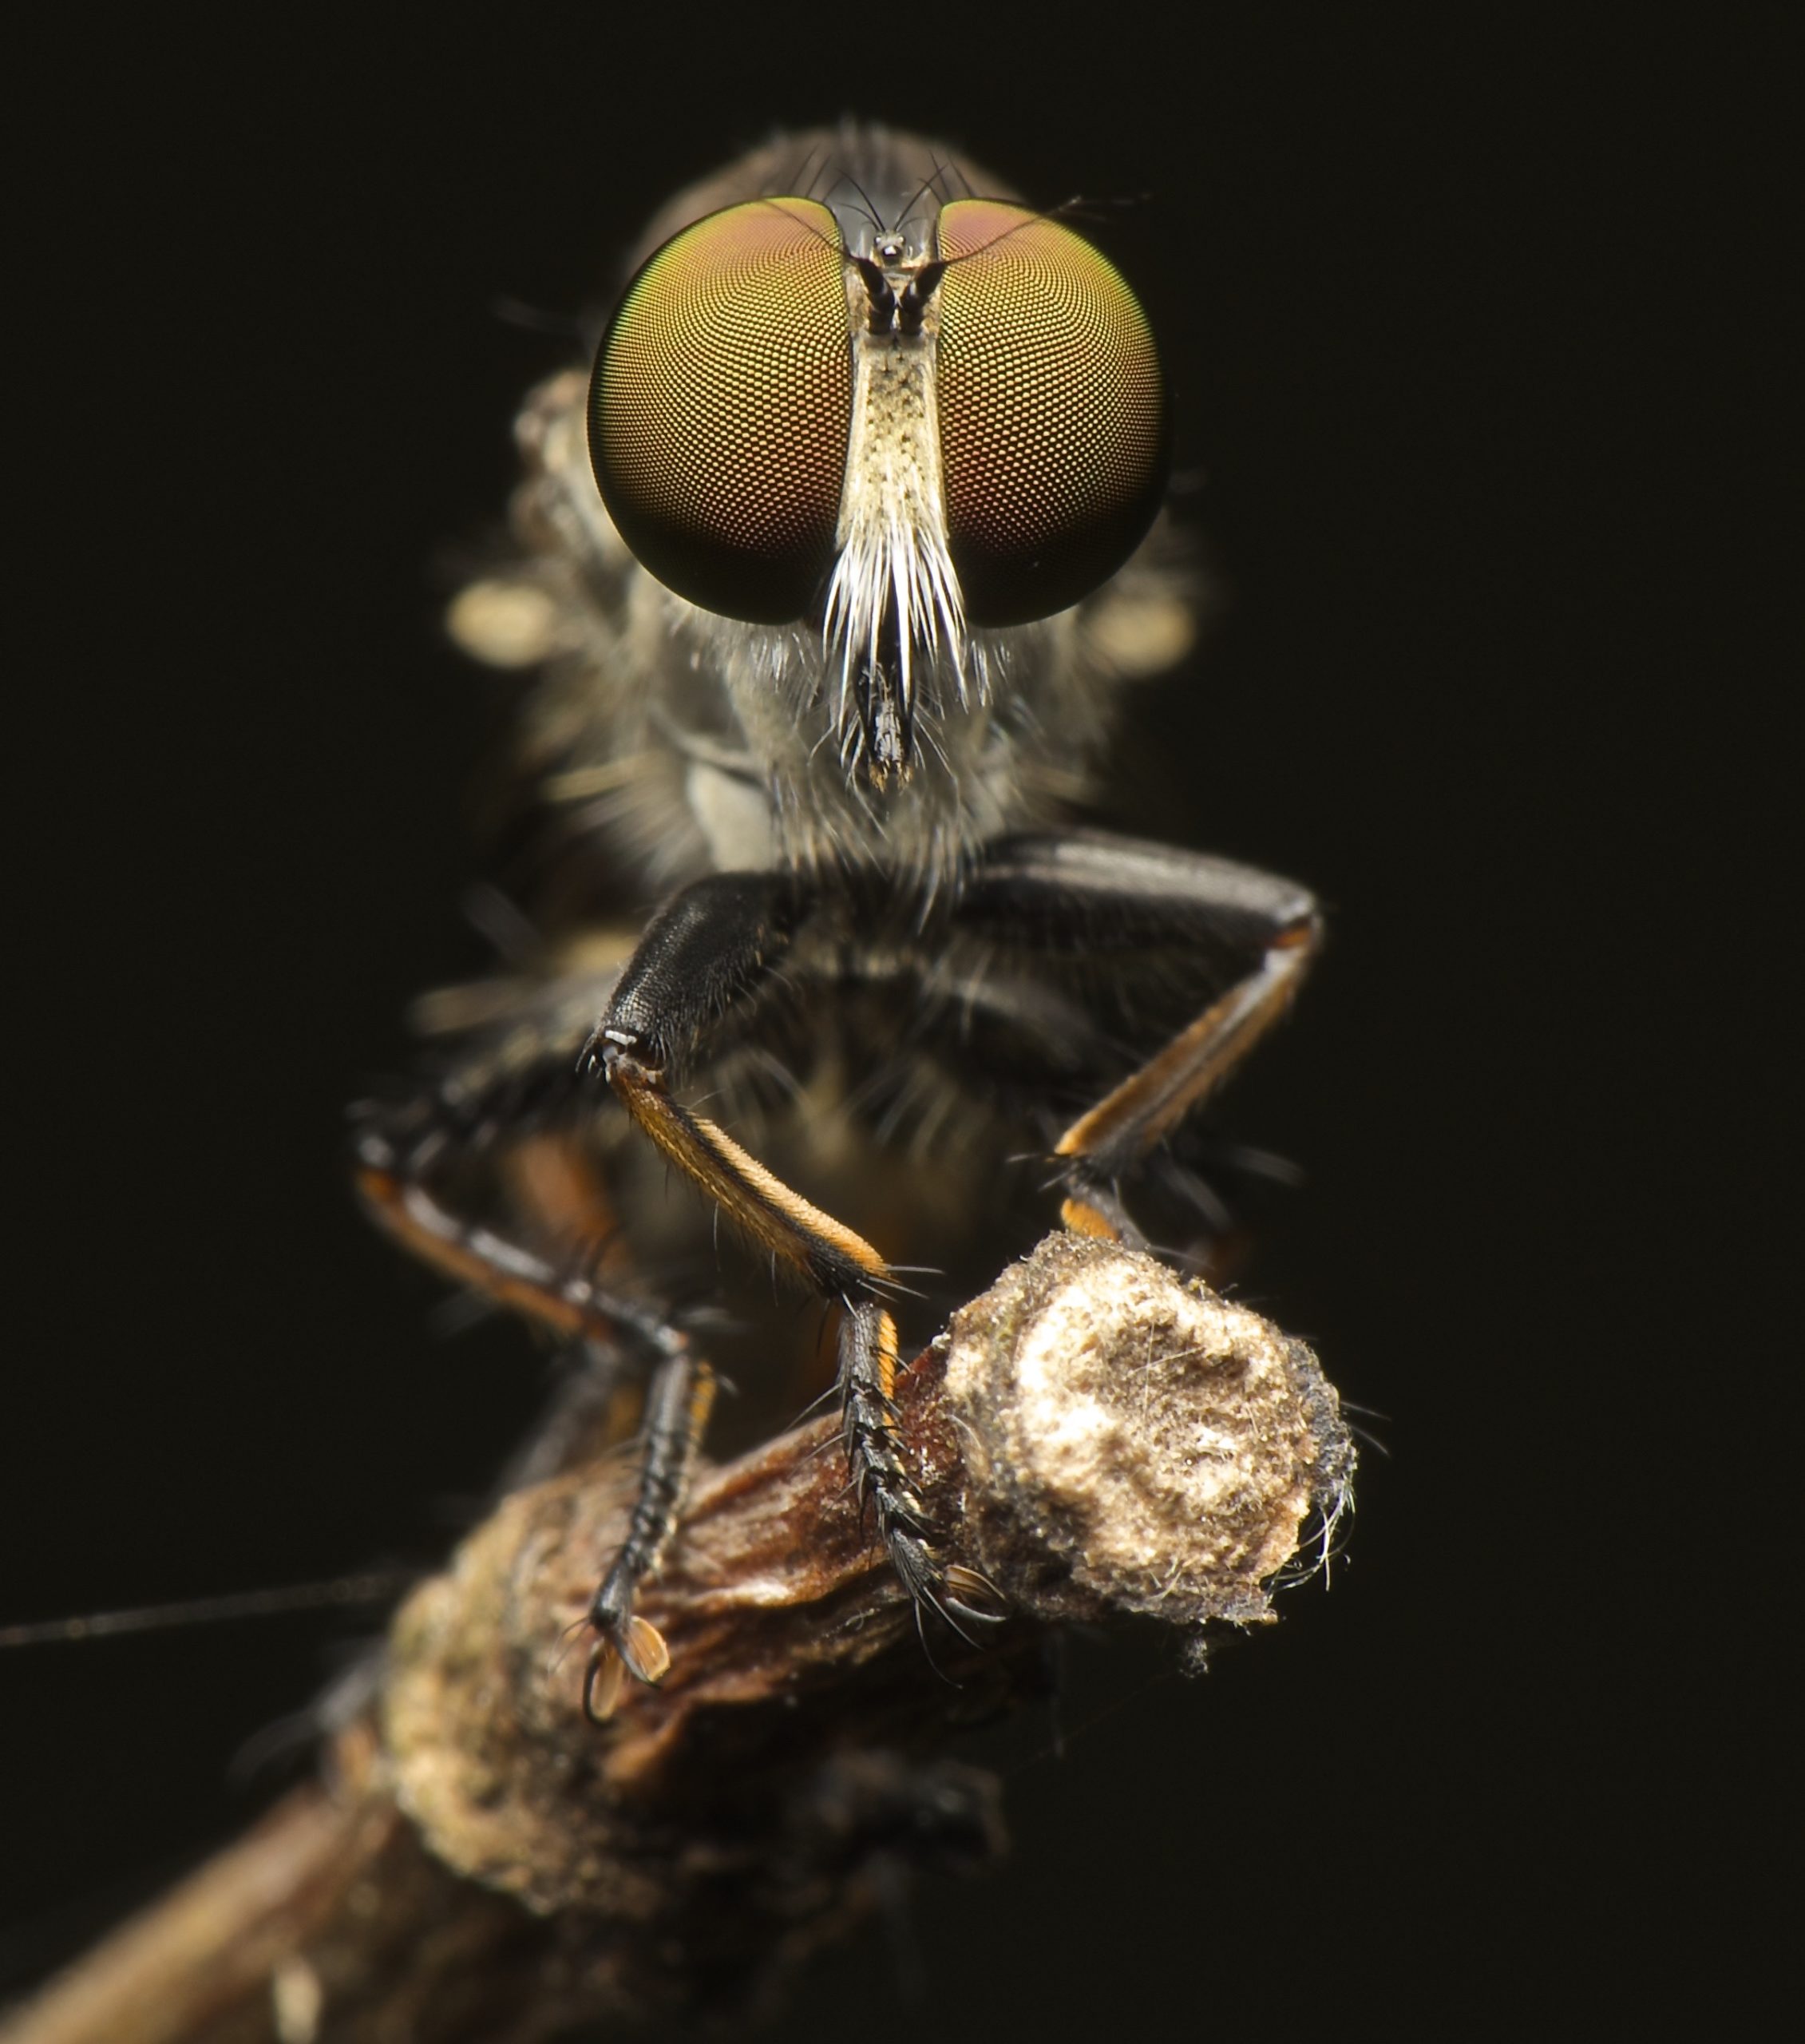 A robber fly poised on a stem, against a dark background